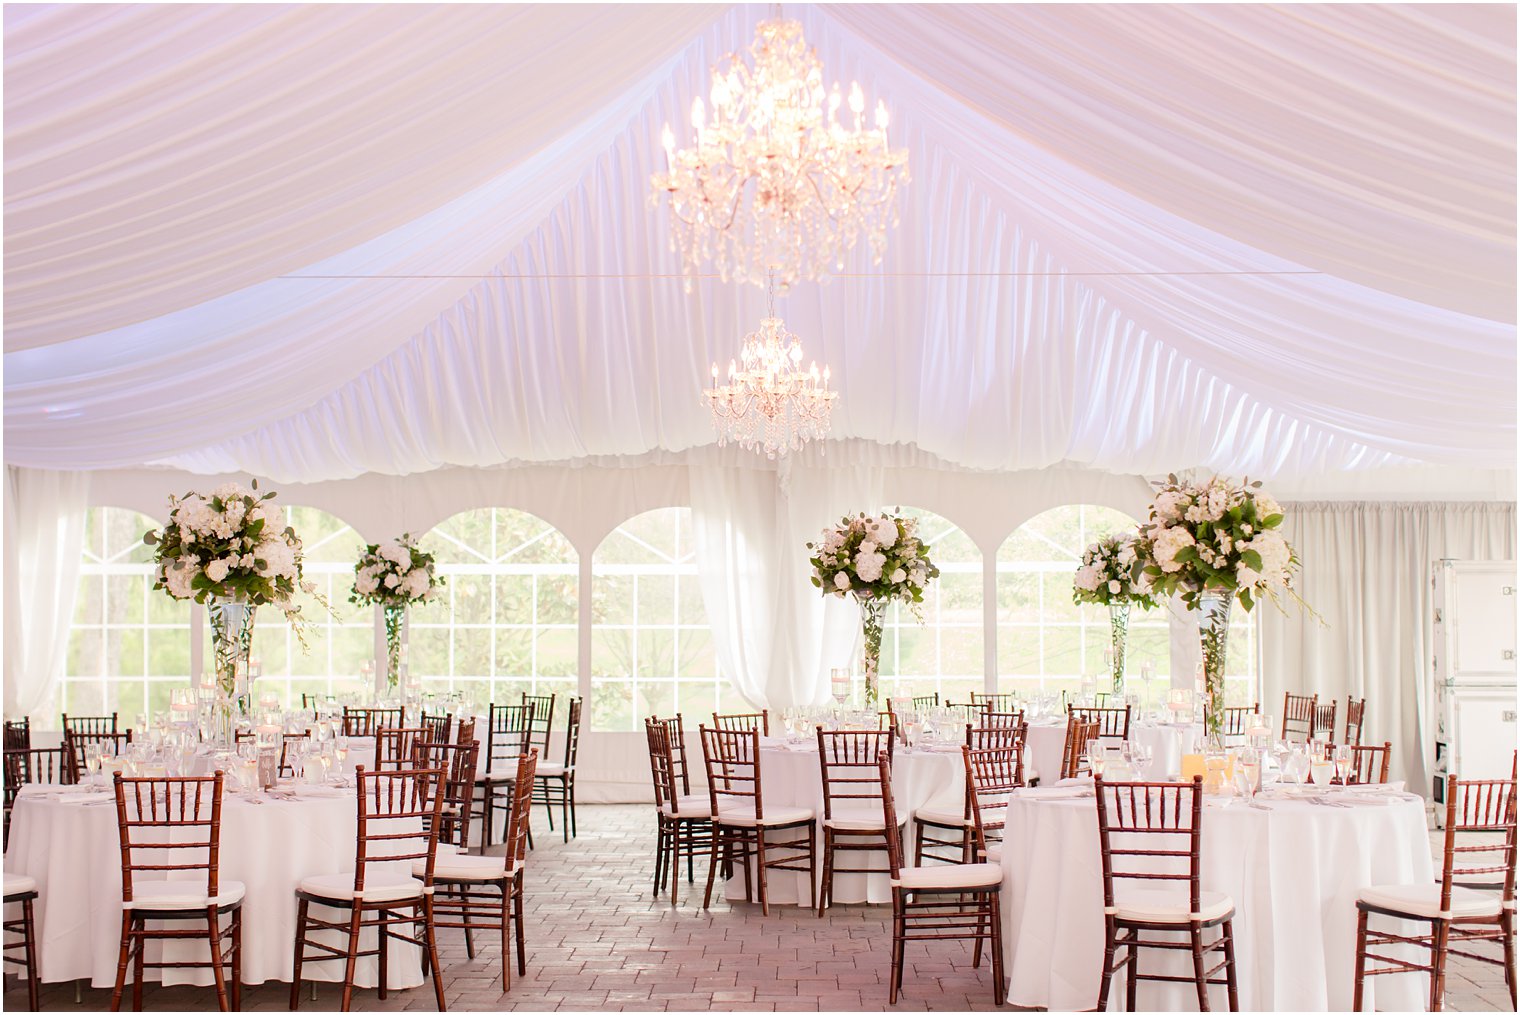 Wedding reception tent at Windows on the Water at Frogbridge in Millstone NJ